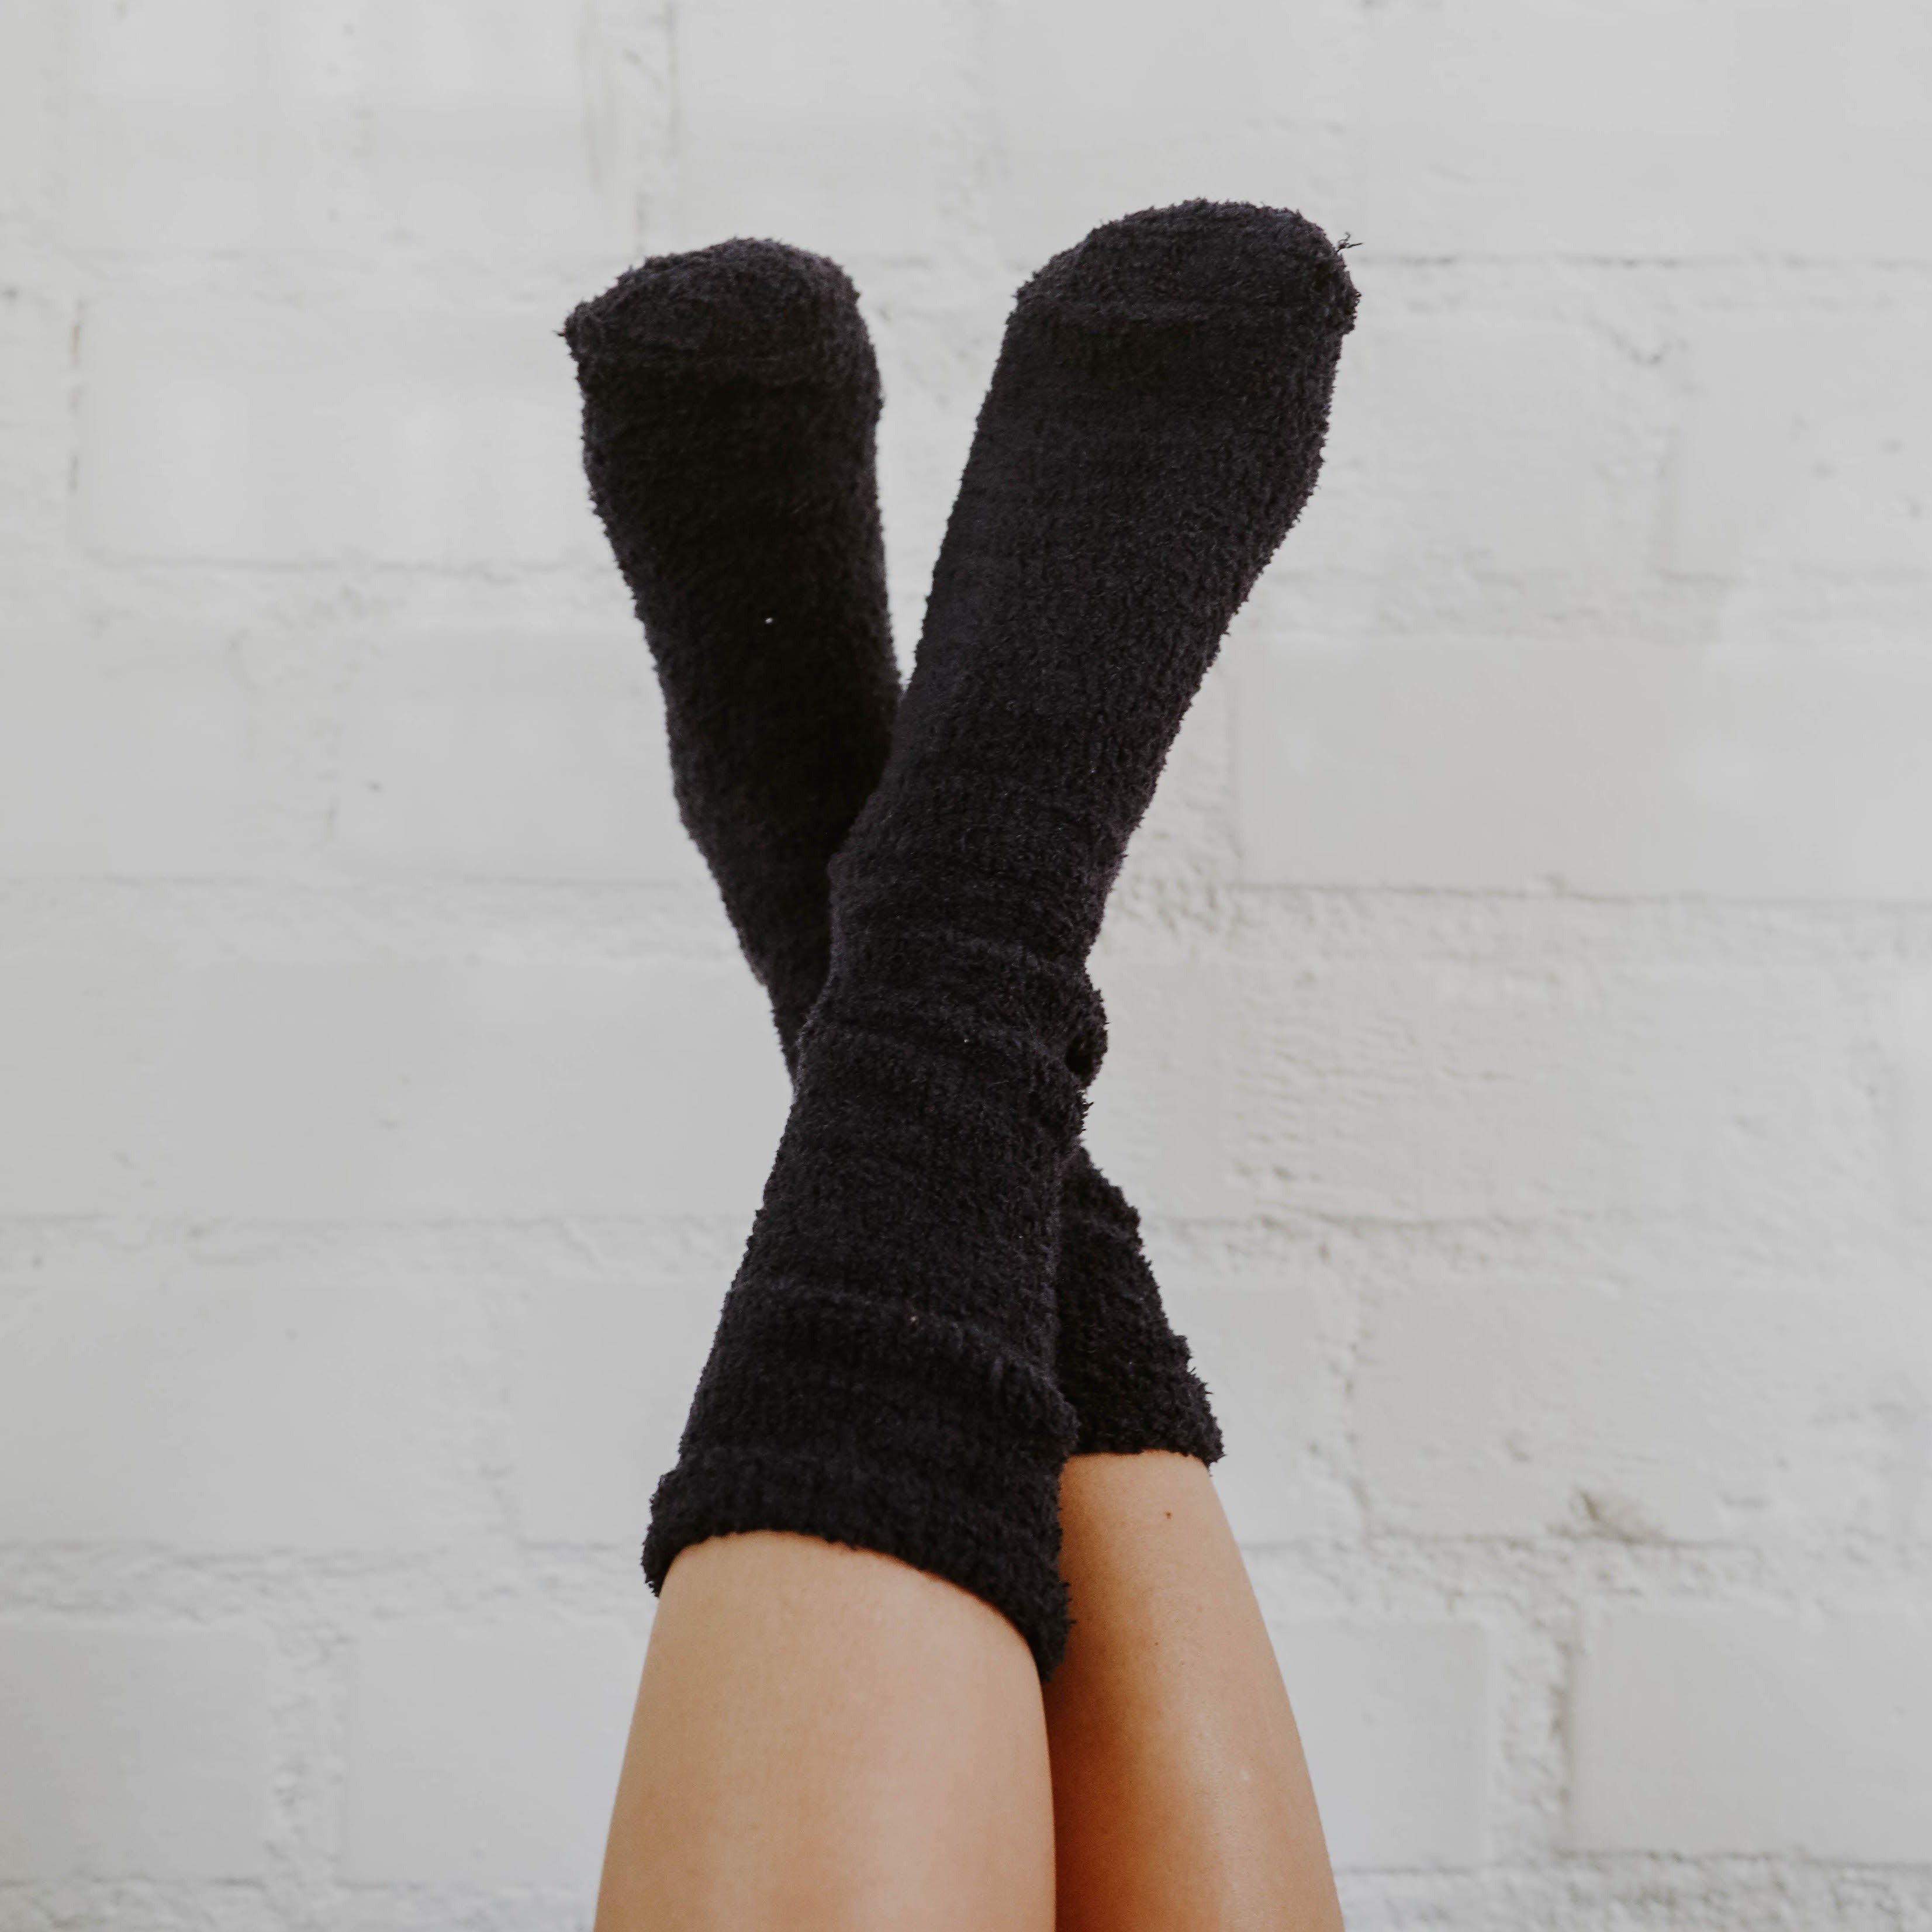 A girl with tan legs wearing mid-calf navy blue fuzzy socks with her legs up in the air criss-crossing against a white background